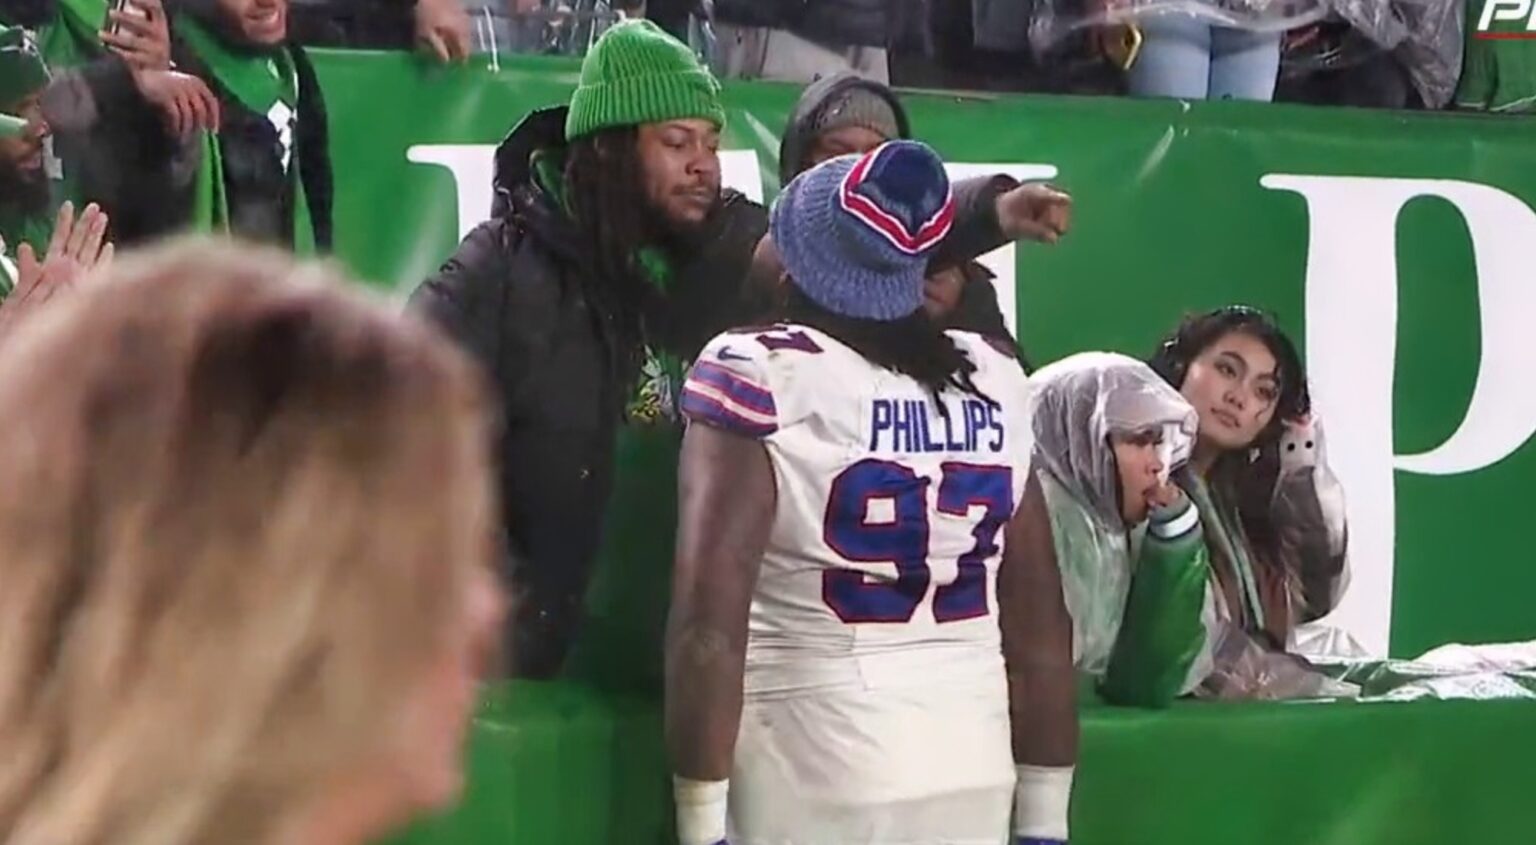 A New Video Shows Bills Players Shoving and Confronting an Eagles Fan Who Made Life-Threatening Remarks While Watching From the Stands (VIDEO)